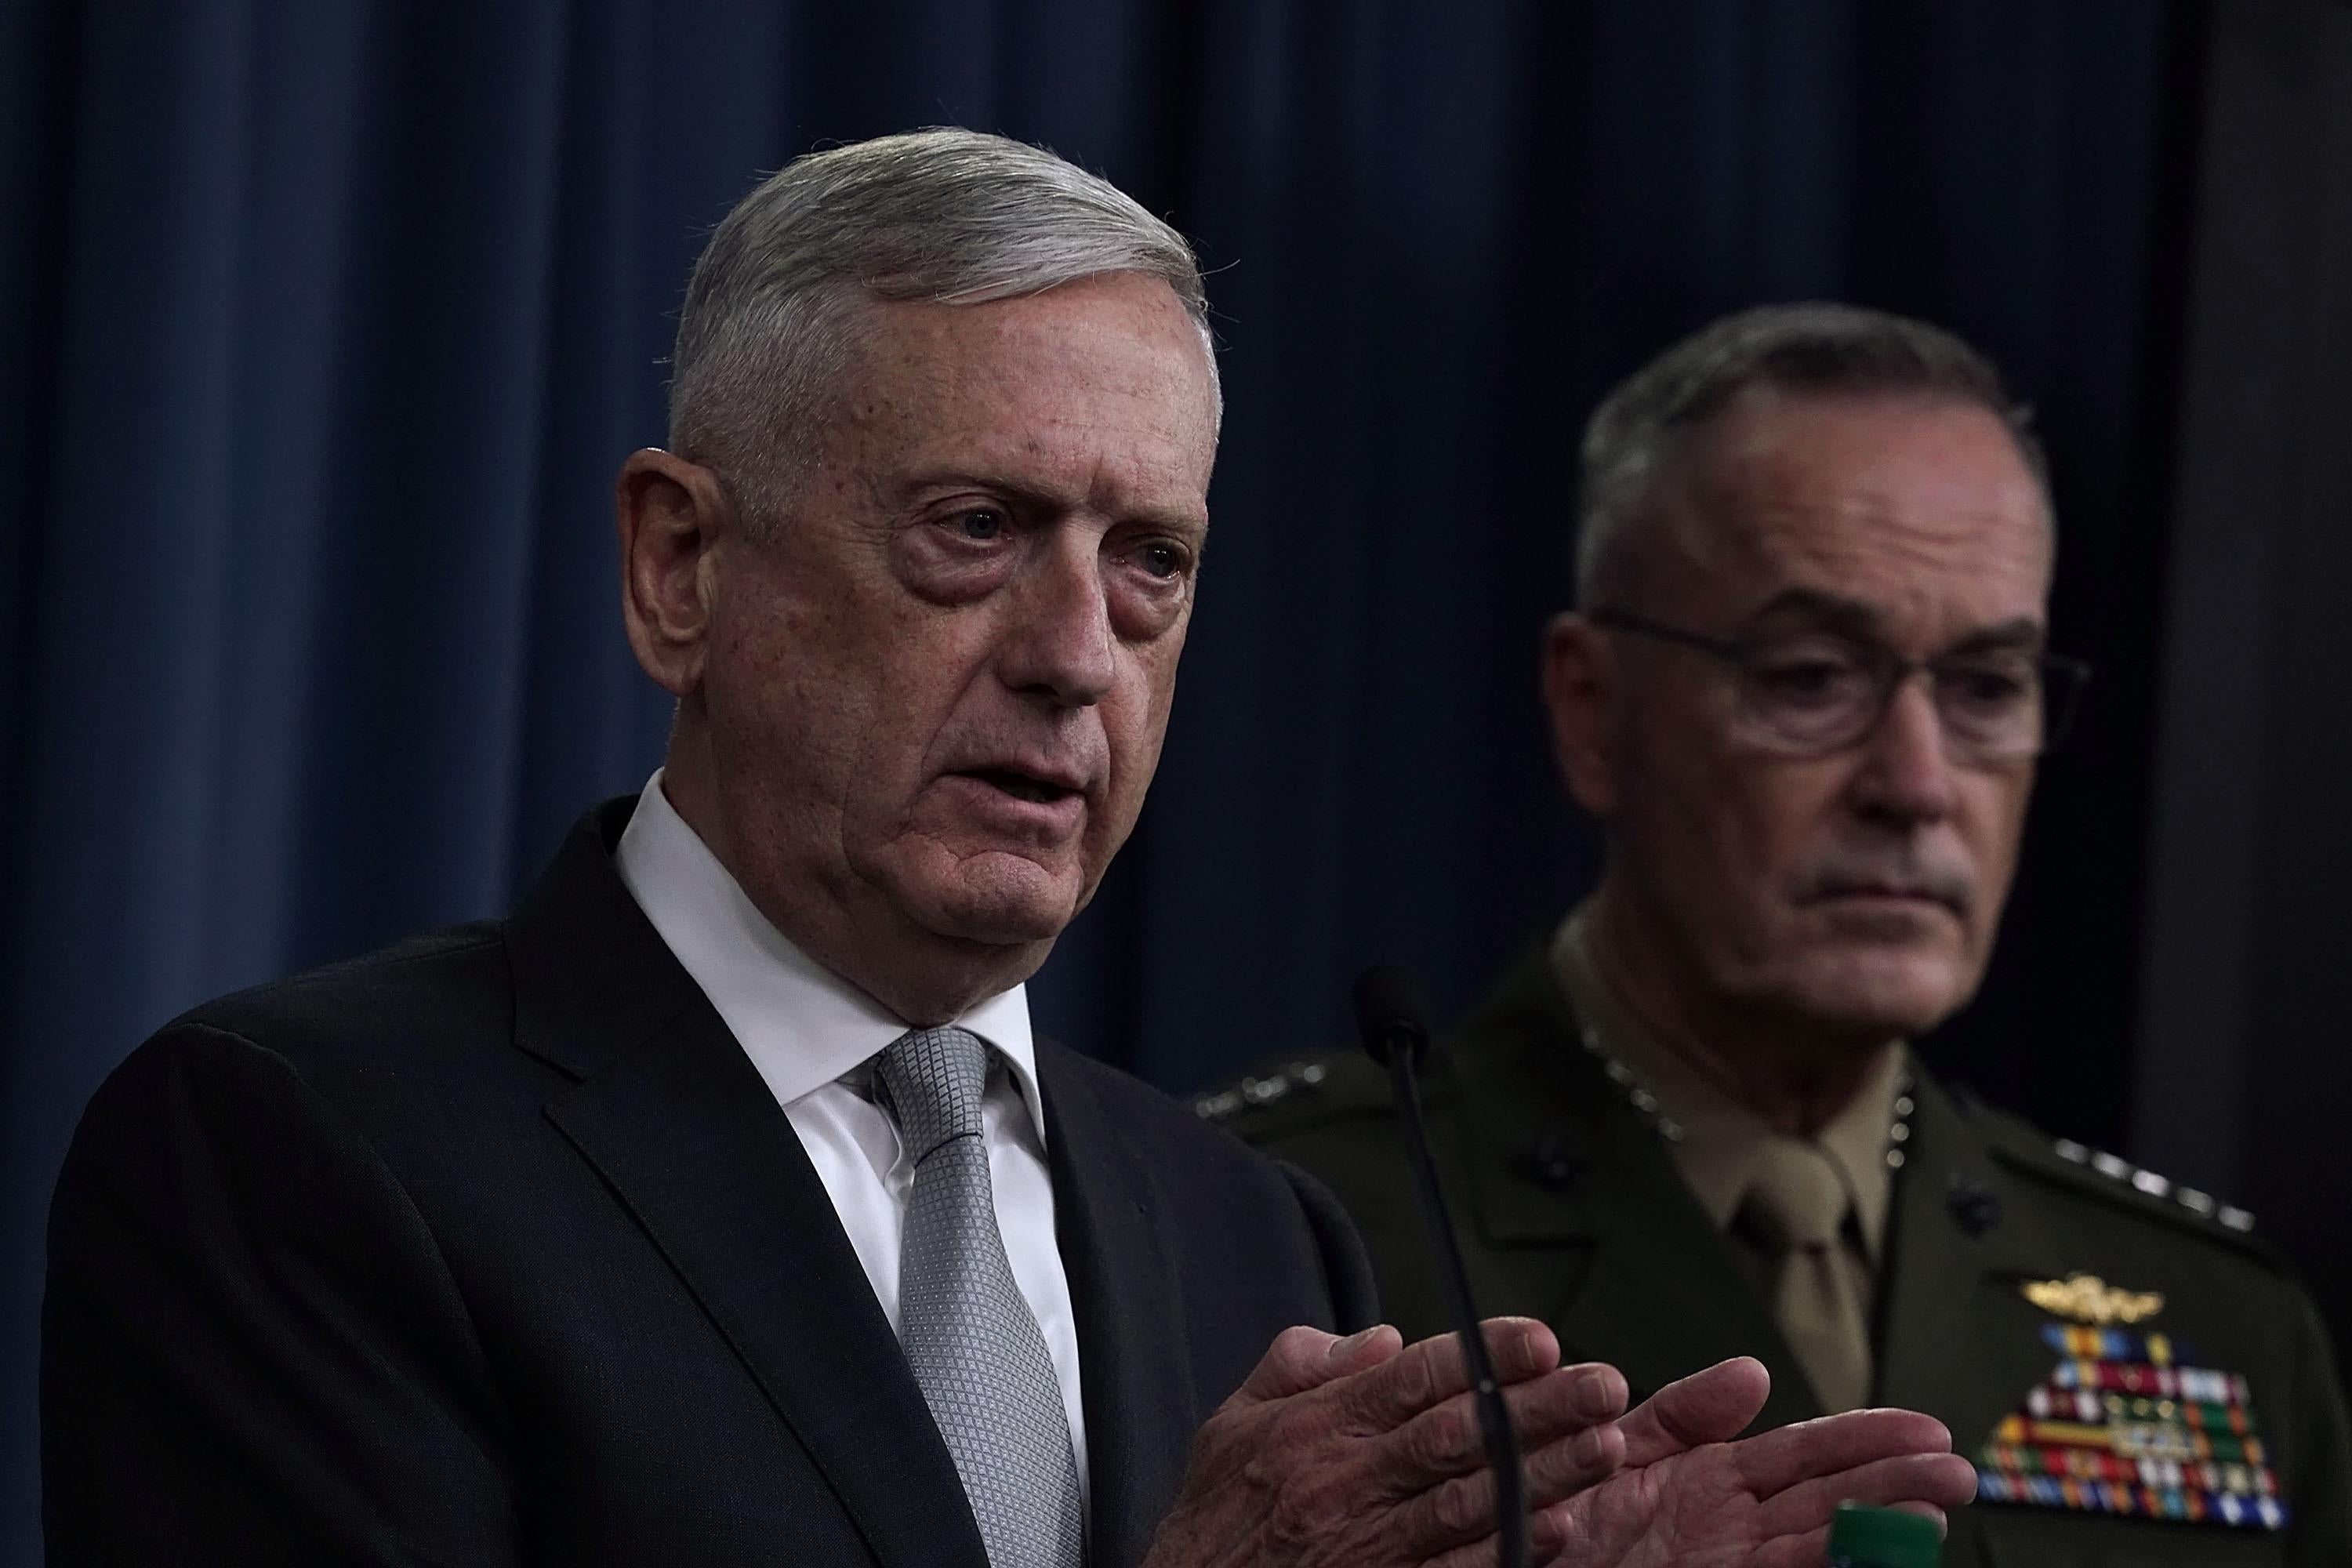 ARLINGTON, VA - APRIL 13:  U.S. U.S. Defense Secretary Jim Mattis (L) and Chairman of the Joint Chiefs of Staff Gen. Joseph Dunford (R) brief members of the media on Syria at the Pentagon April 13, 2018 in Arlington, Virginia. President Donald Trump has ordered a joint force strike on Syria with Britain and France over the recent suspected chemical attack by Syrian President Bashar al-Assad.  (Photo by Alex Wong/Getty Images)